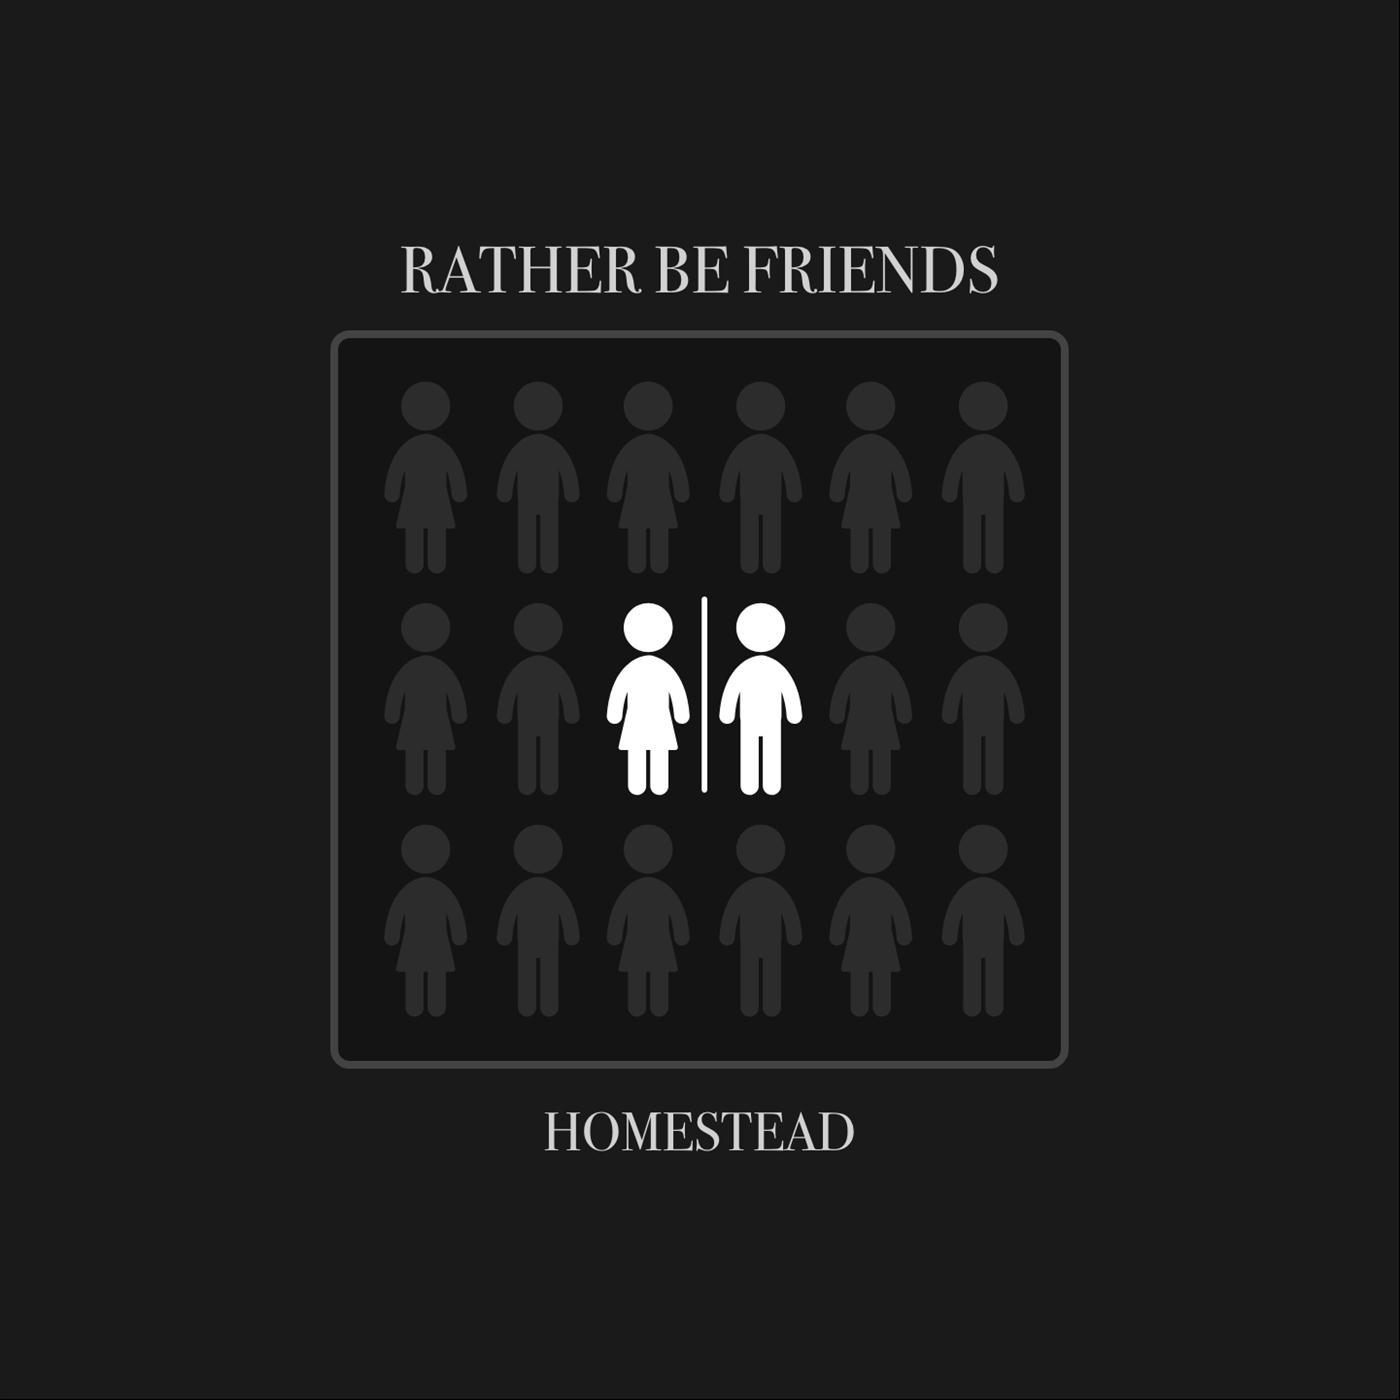 Rather Be Friends